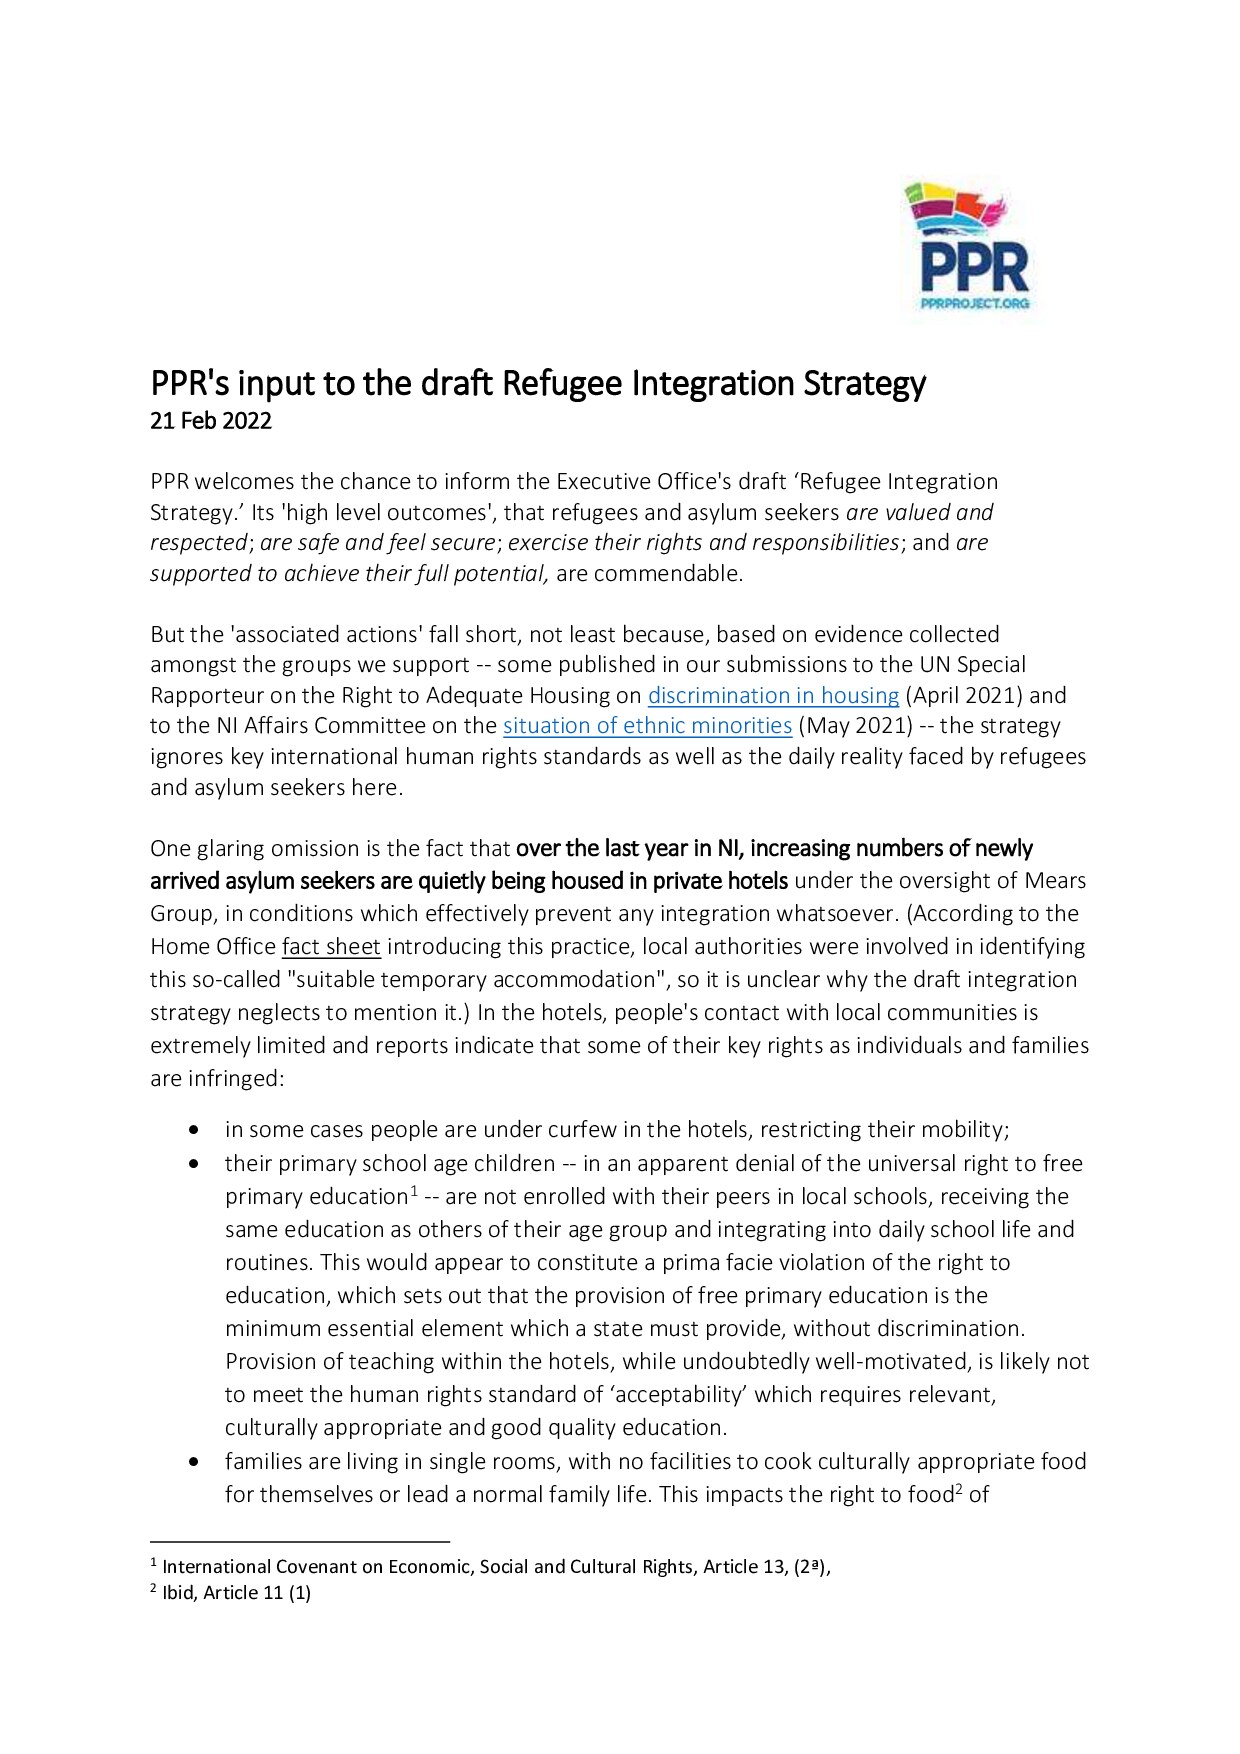 PPR's response to the Executive Office's draft Refugee Integration Strategy